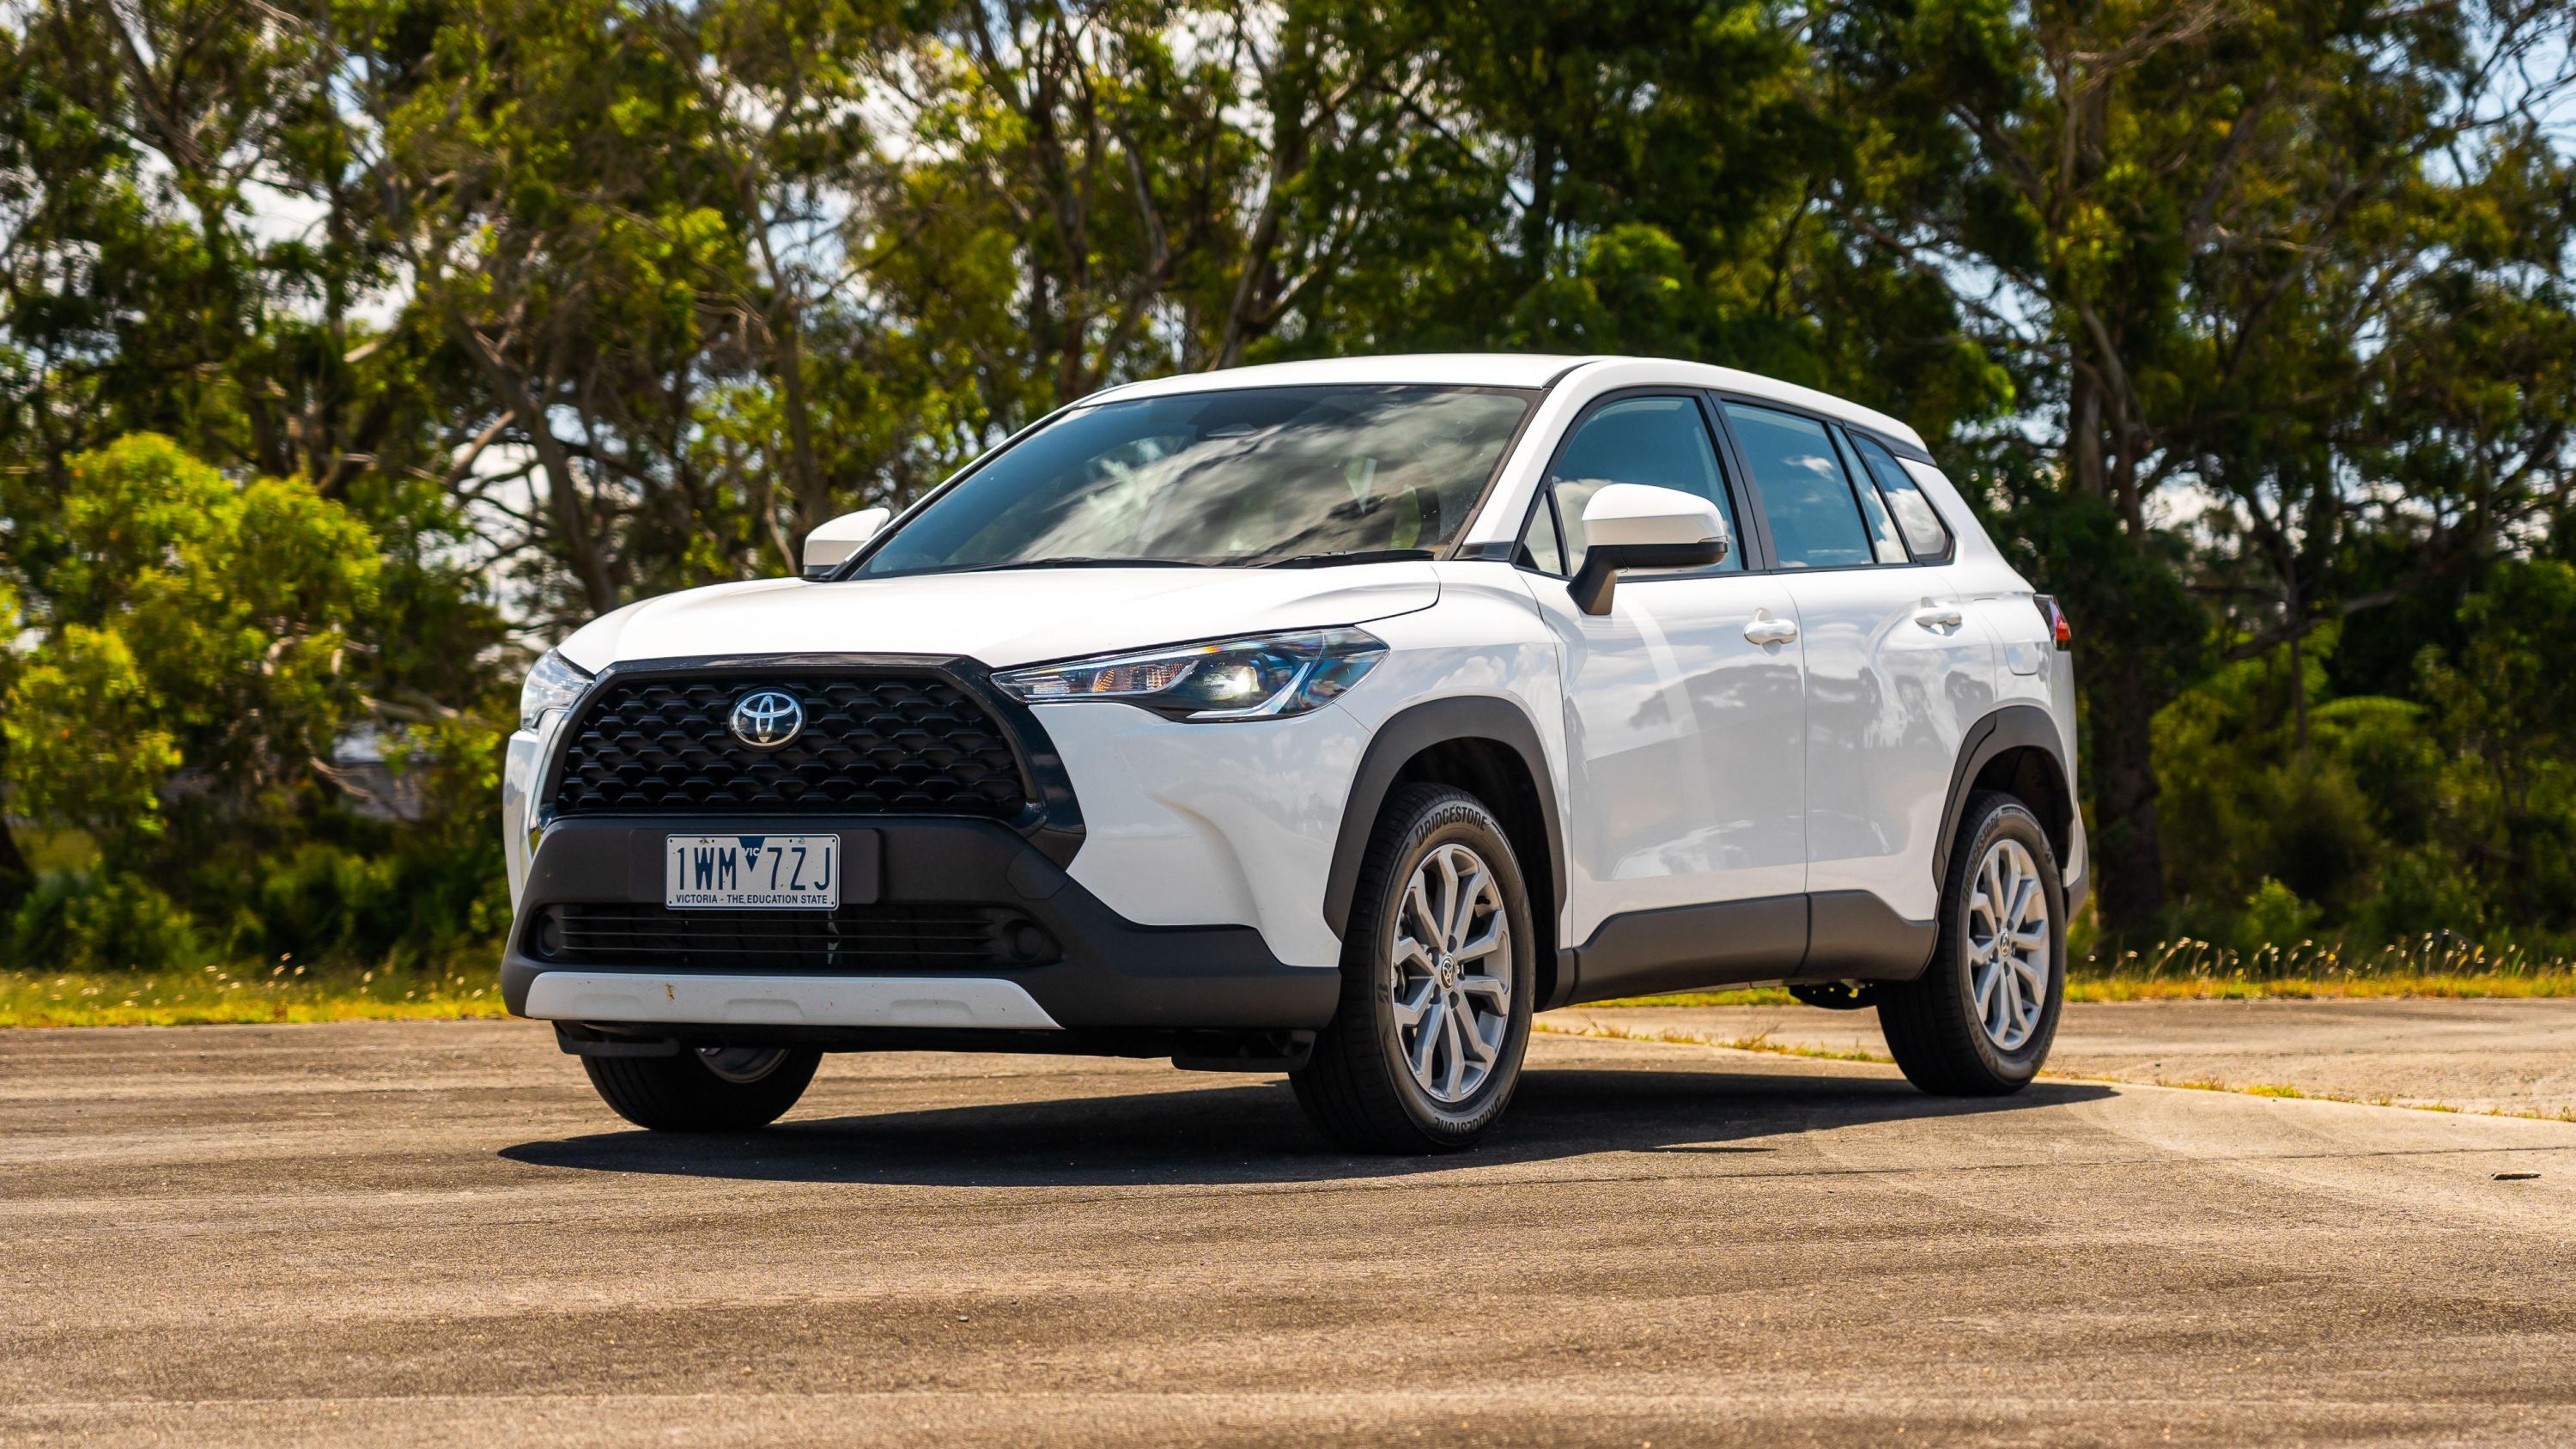 2022 Toyota Corolla Cross Review: A Serviceable Crossover for a